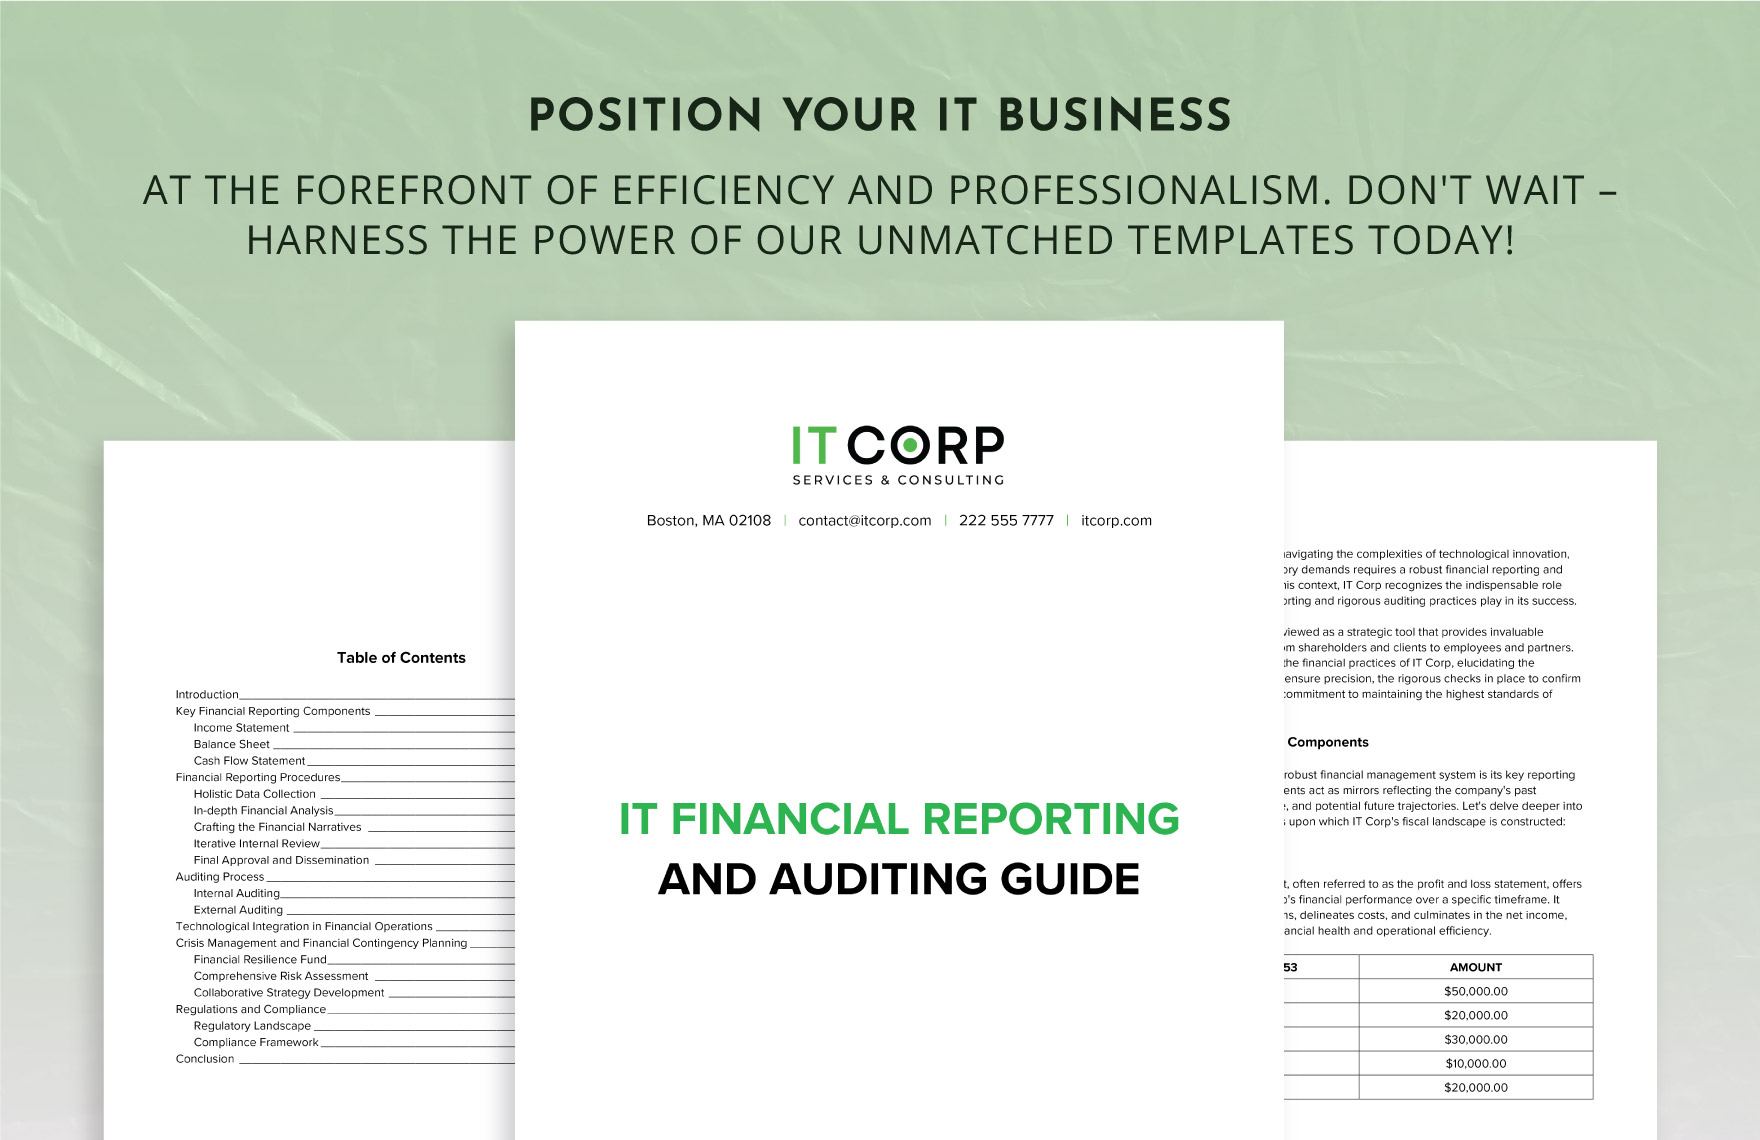 IT Financial Reporting and Auditing Guide Template